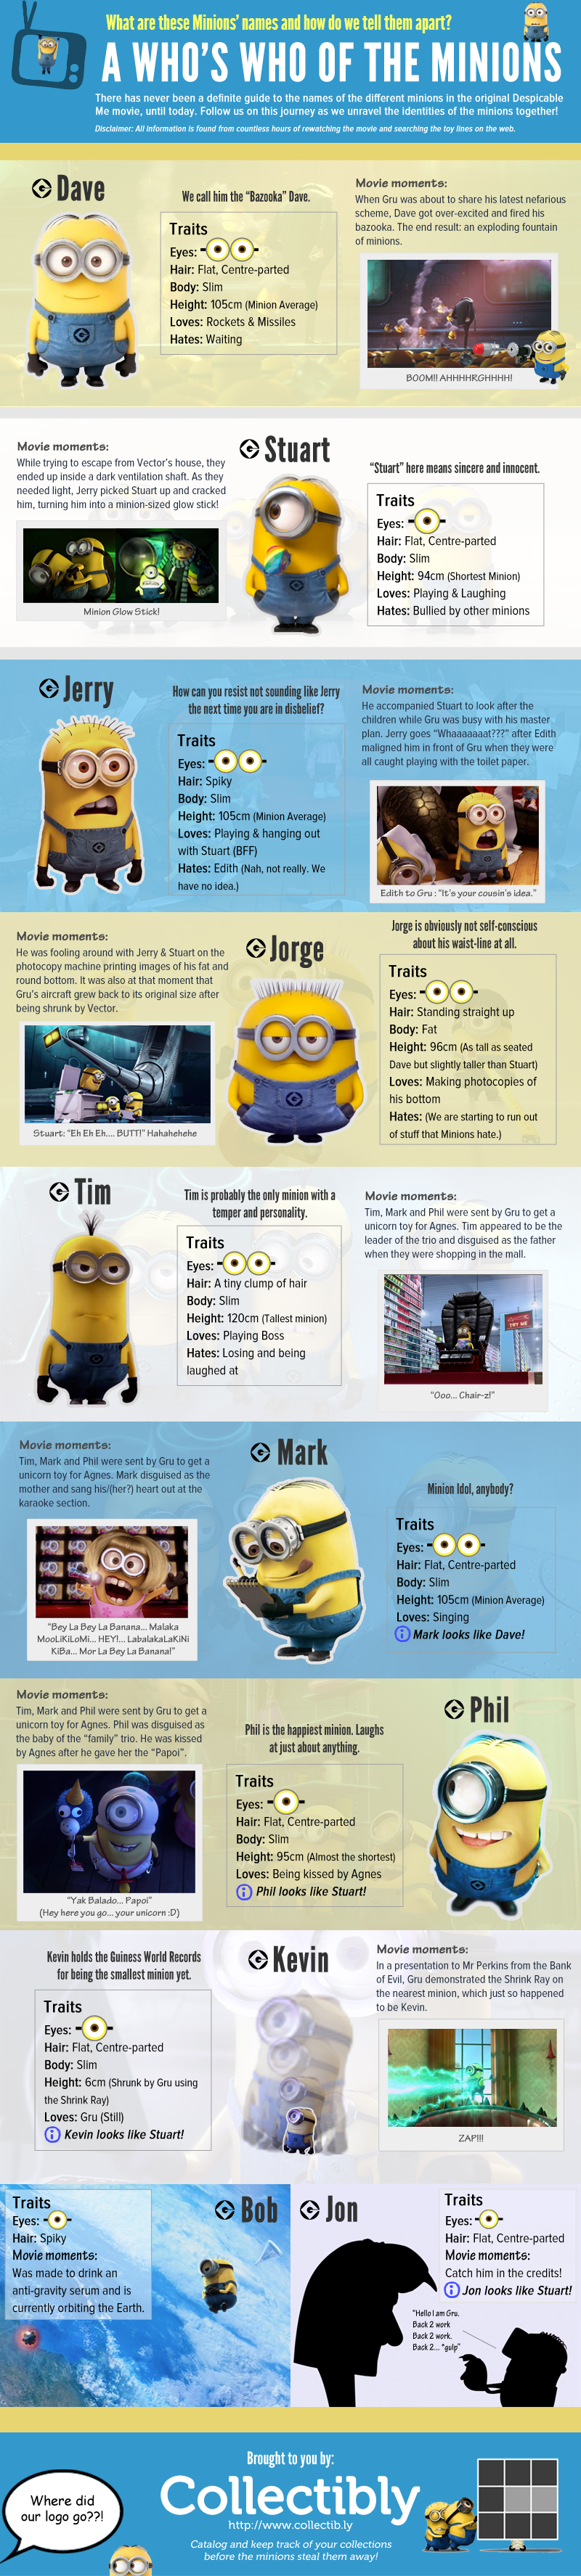 A Who’s who of the Minions